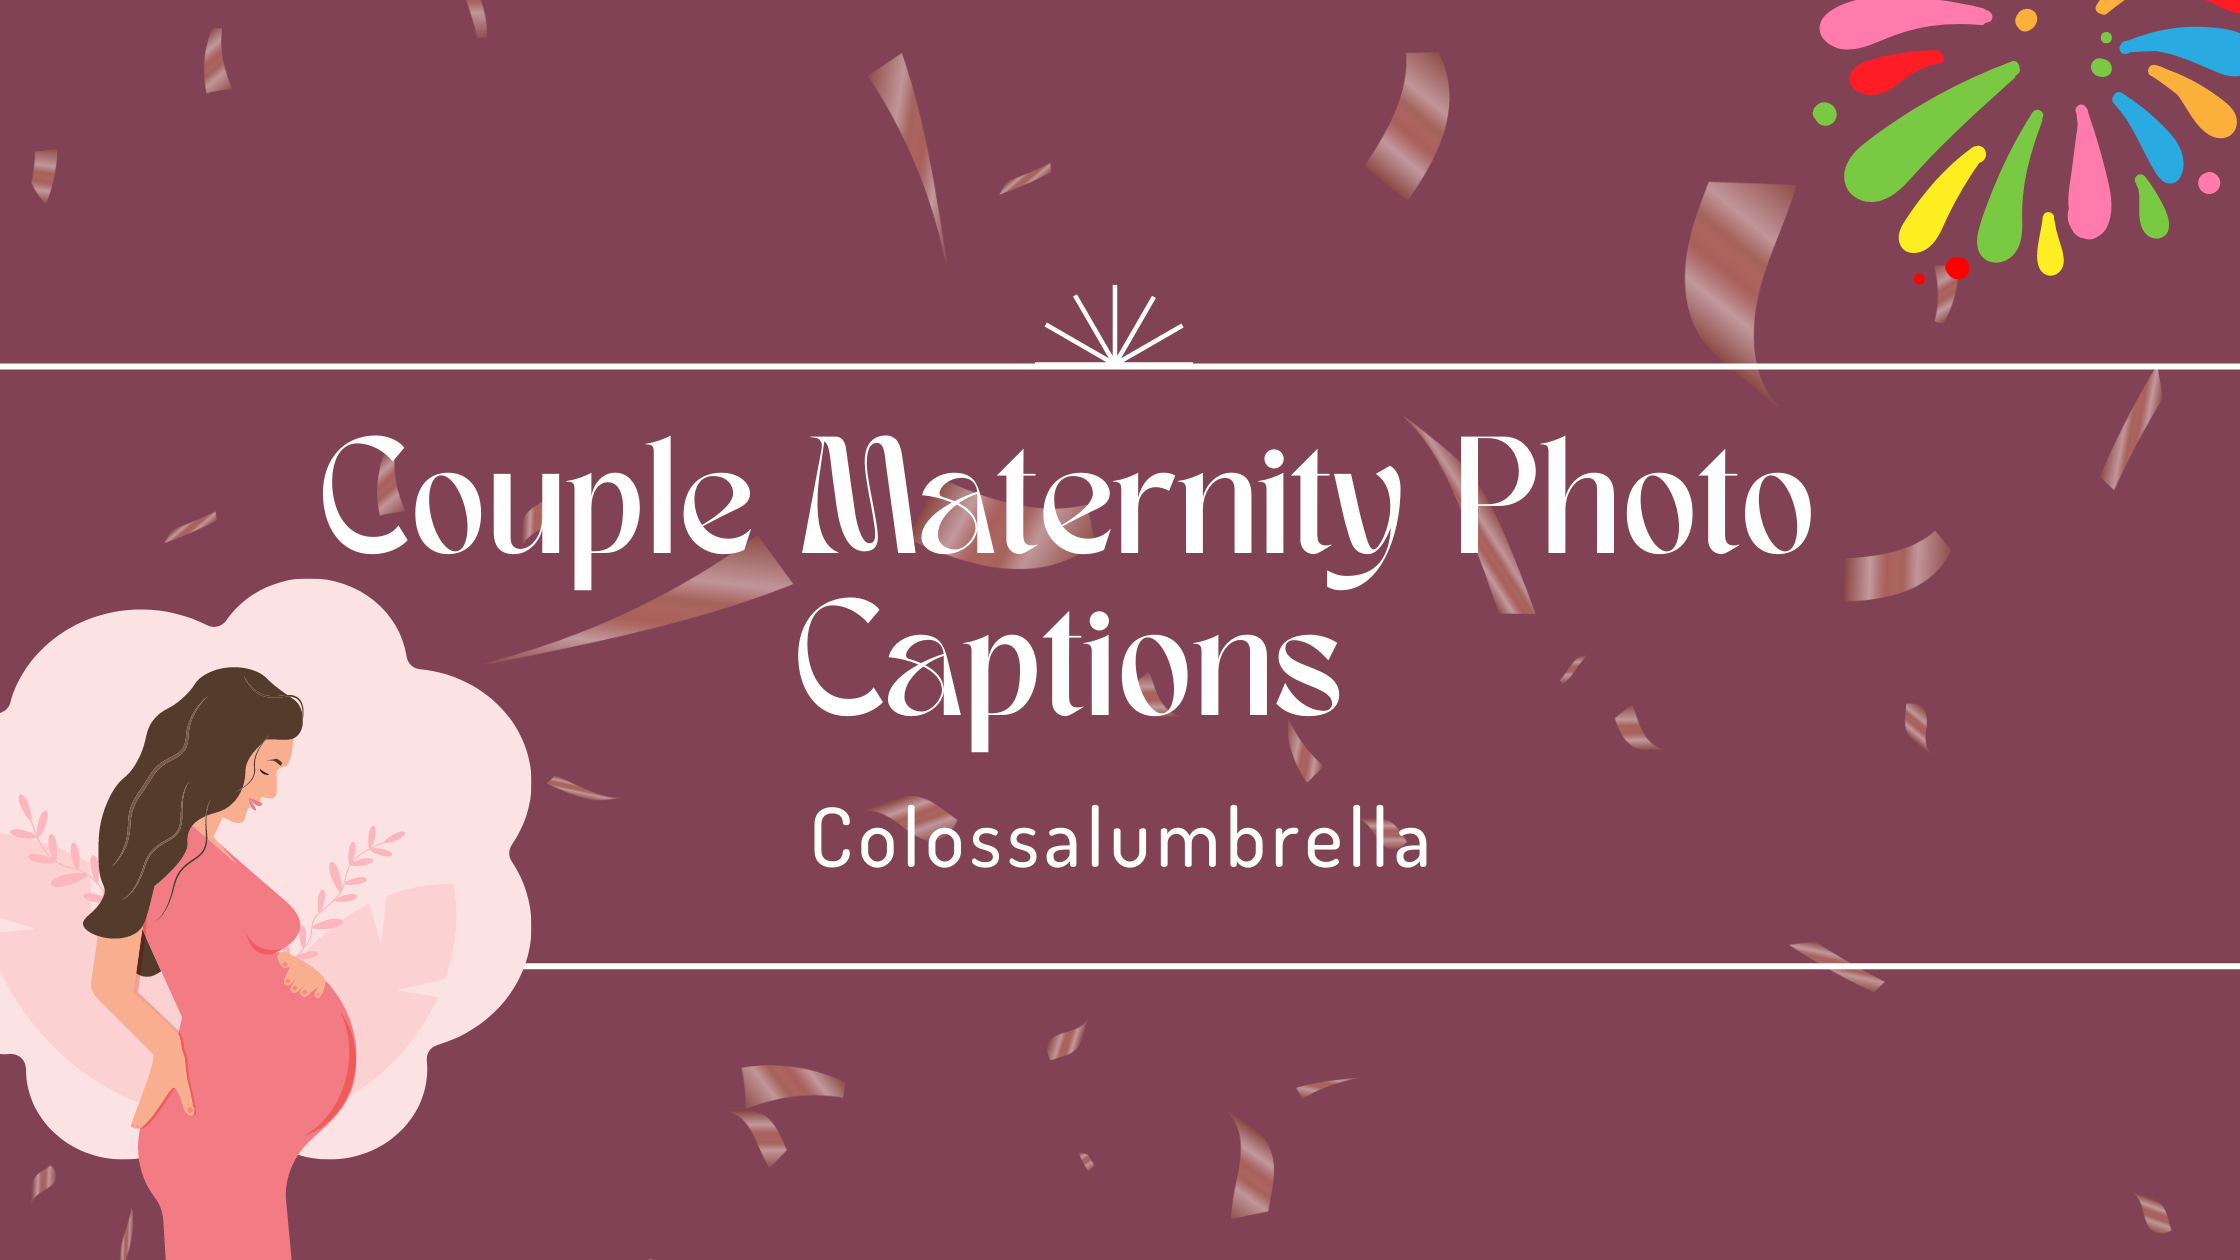 100+ couple maternity photo captions for Instagram by Colossalumbrella